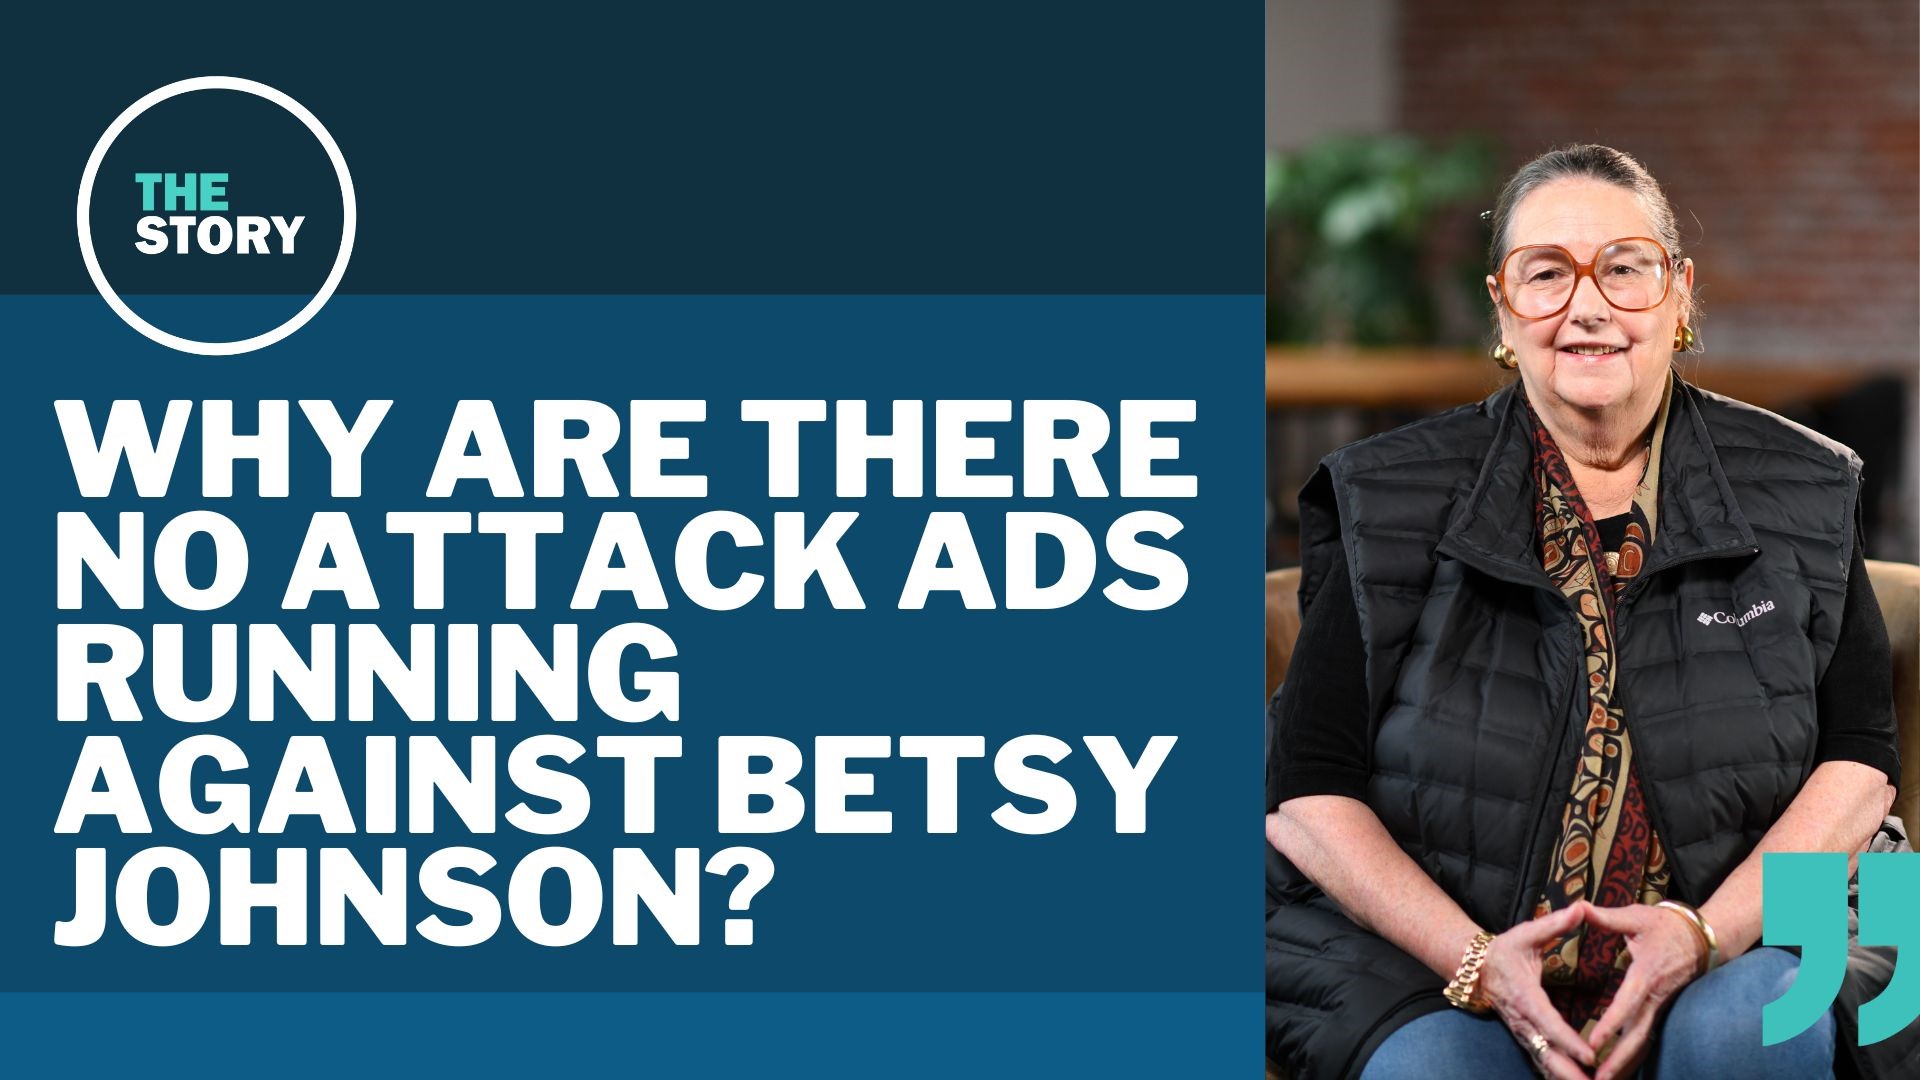 We talk about what it means that there are no ads running against Johnson and what this means for her campaign.